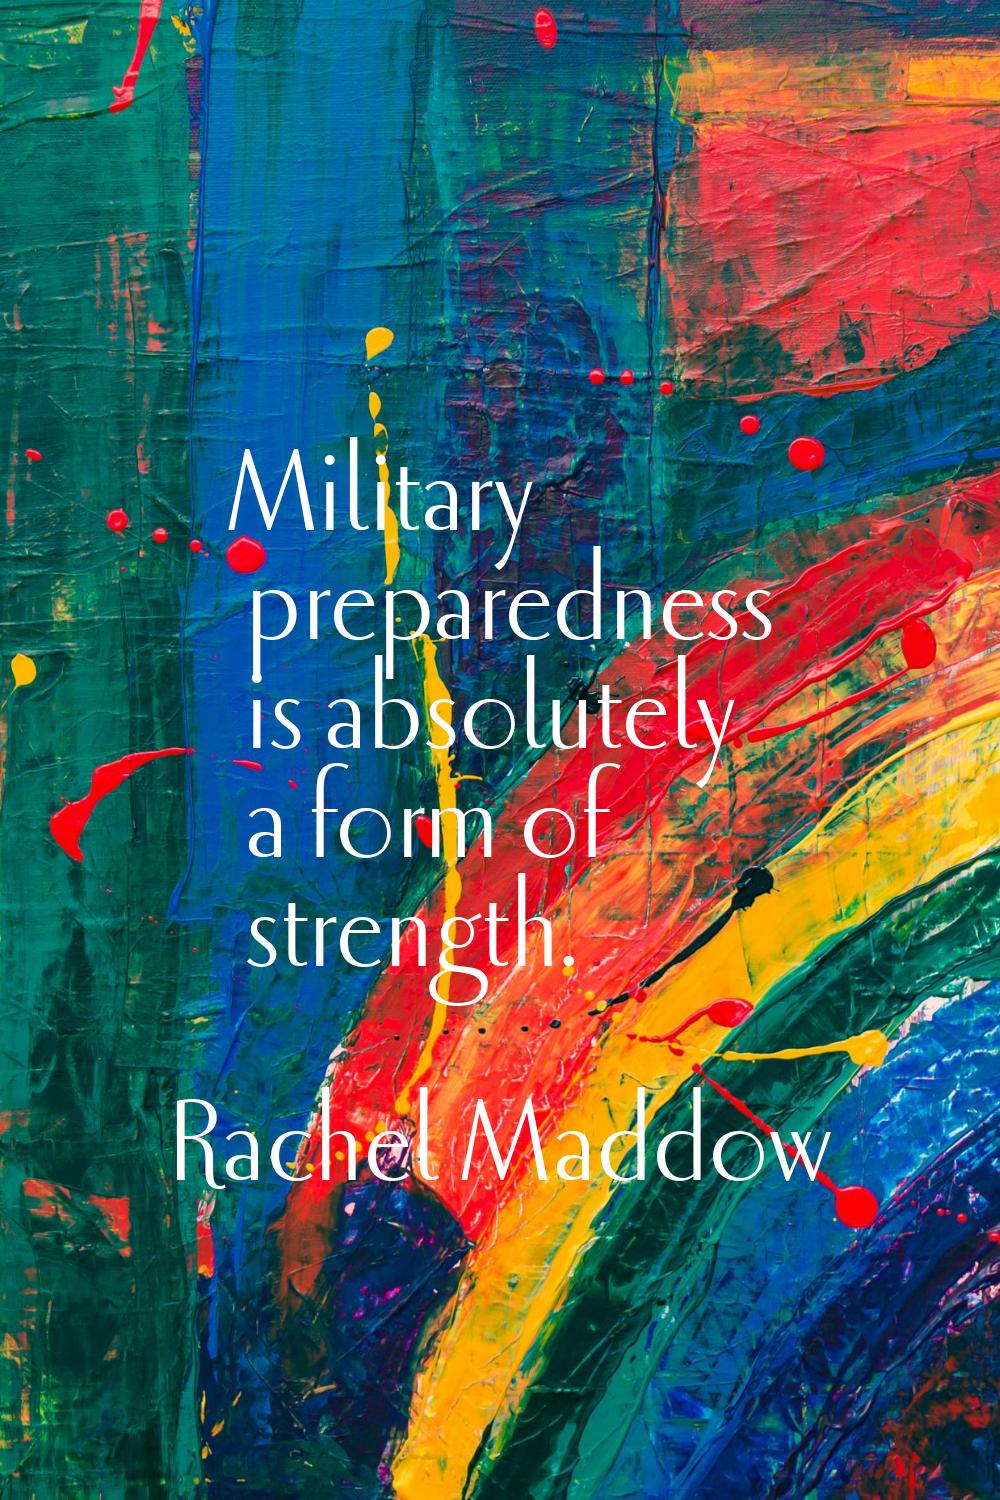 Military preparedness is absolutely a form of strength.